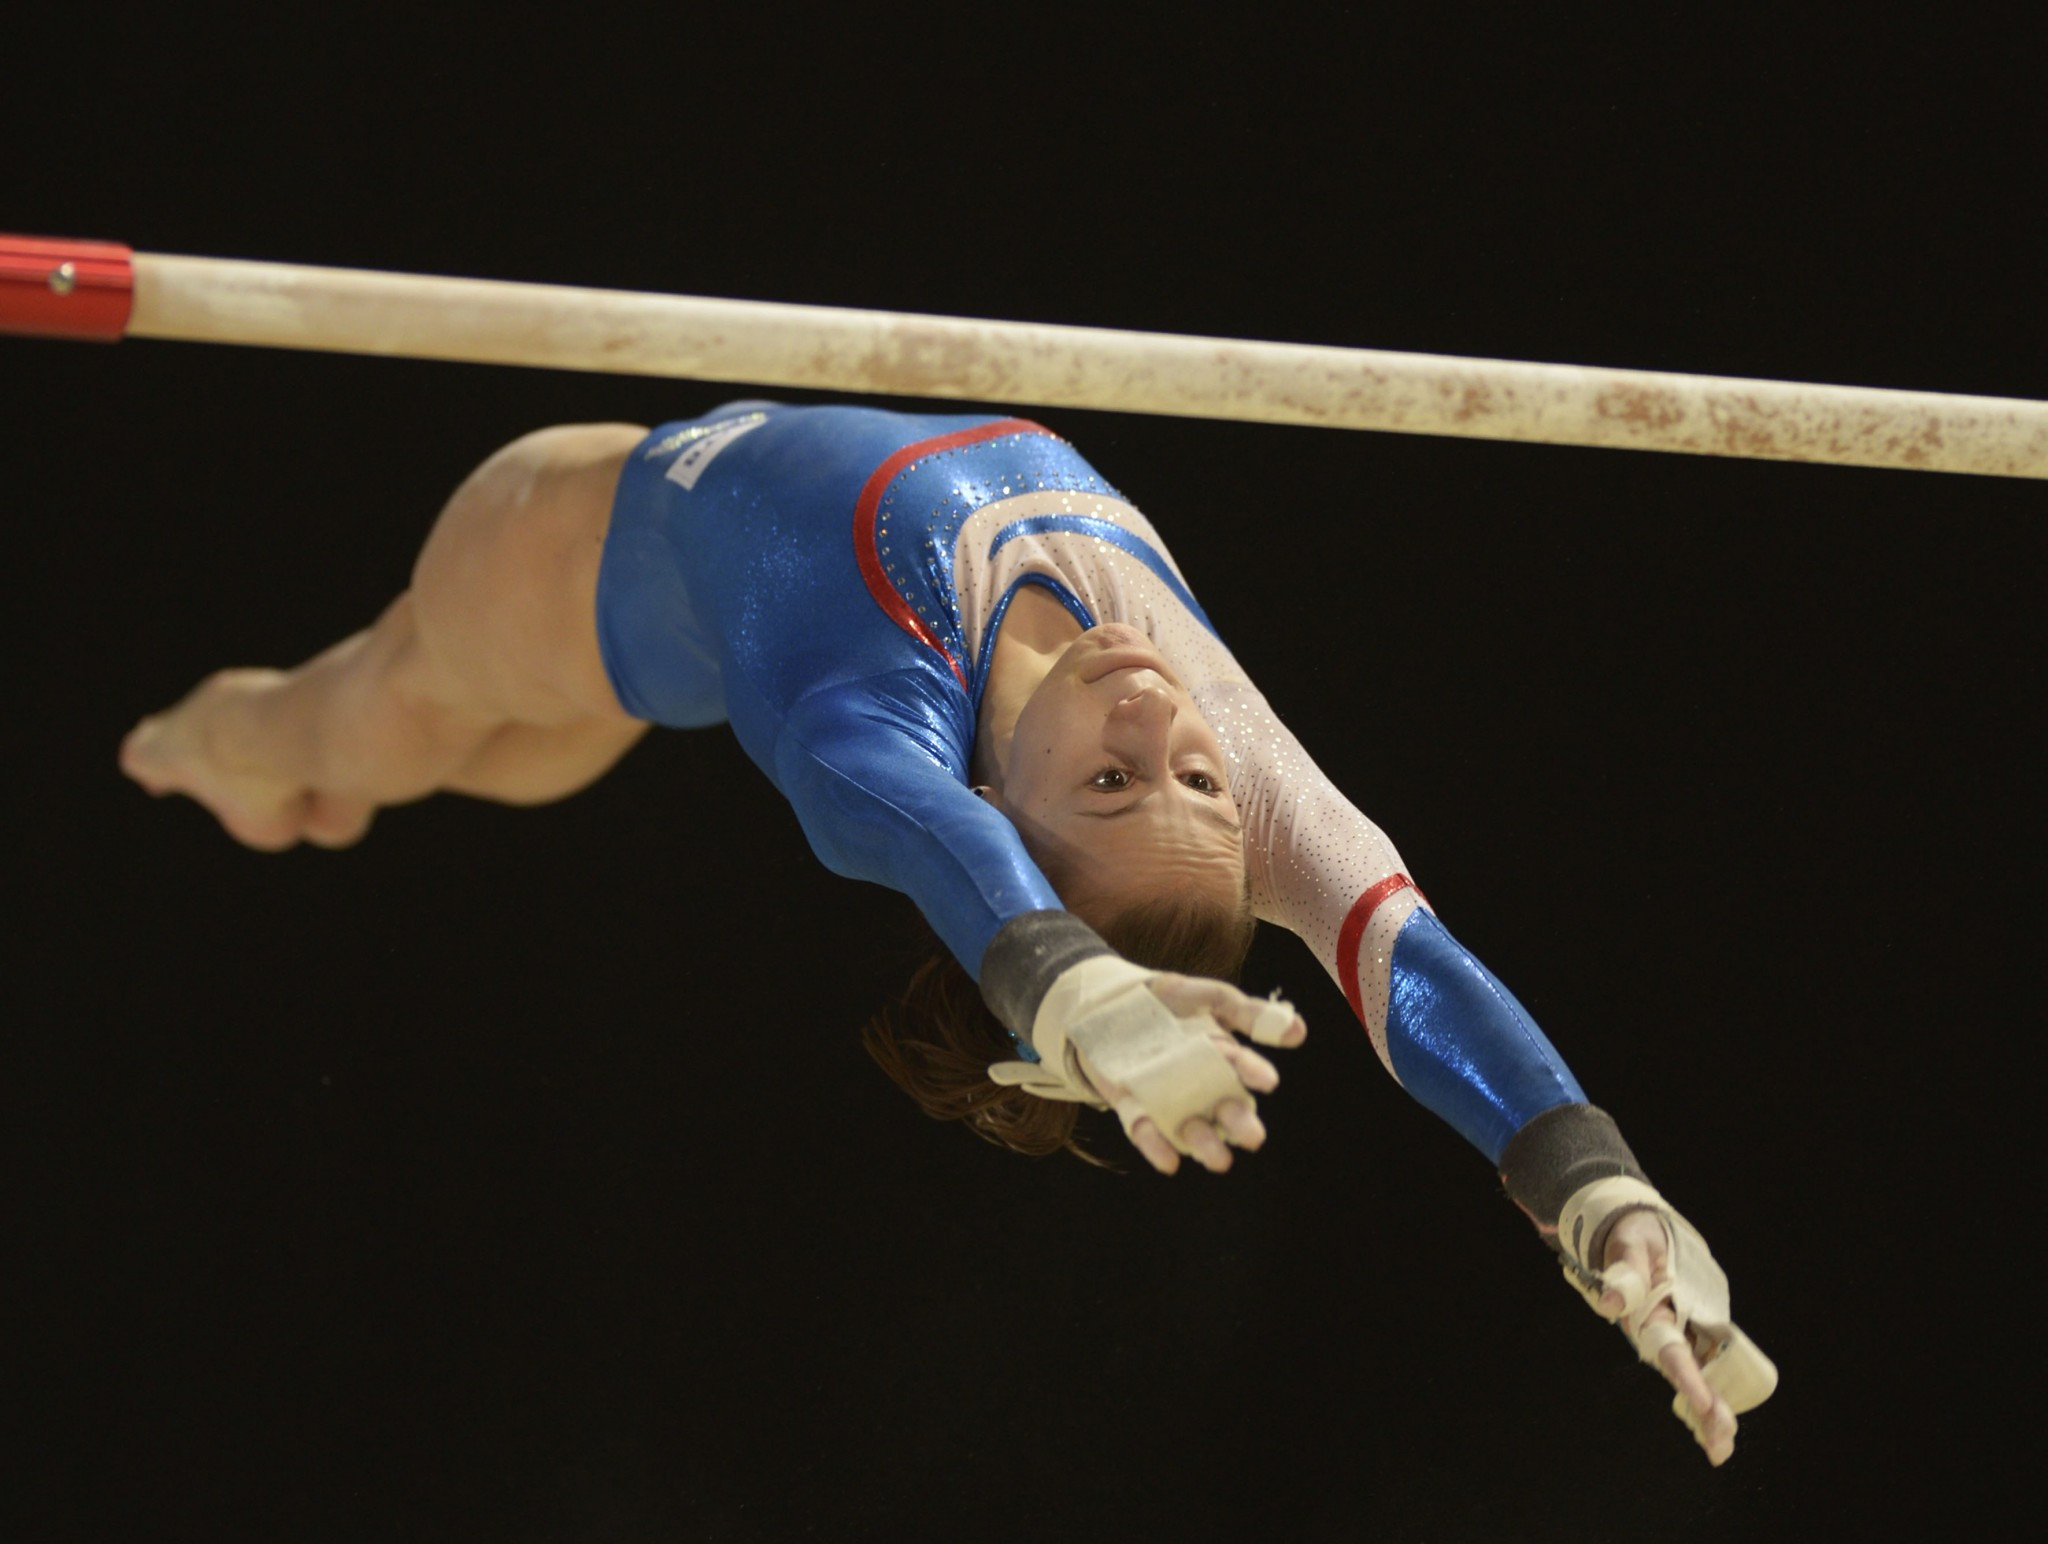 Maria Kharenkova is leading the all-around standings after day one at the European Artistic Gymnastics Individual Championships ©UEG